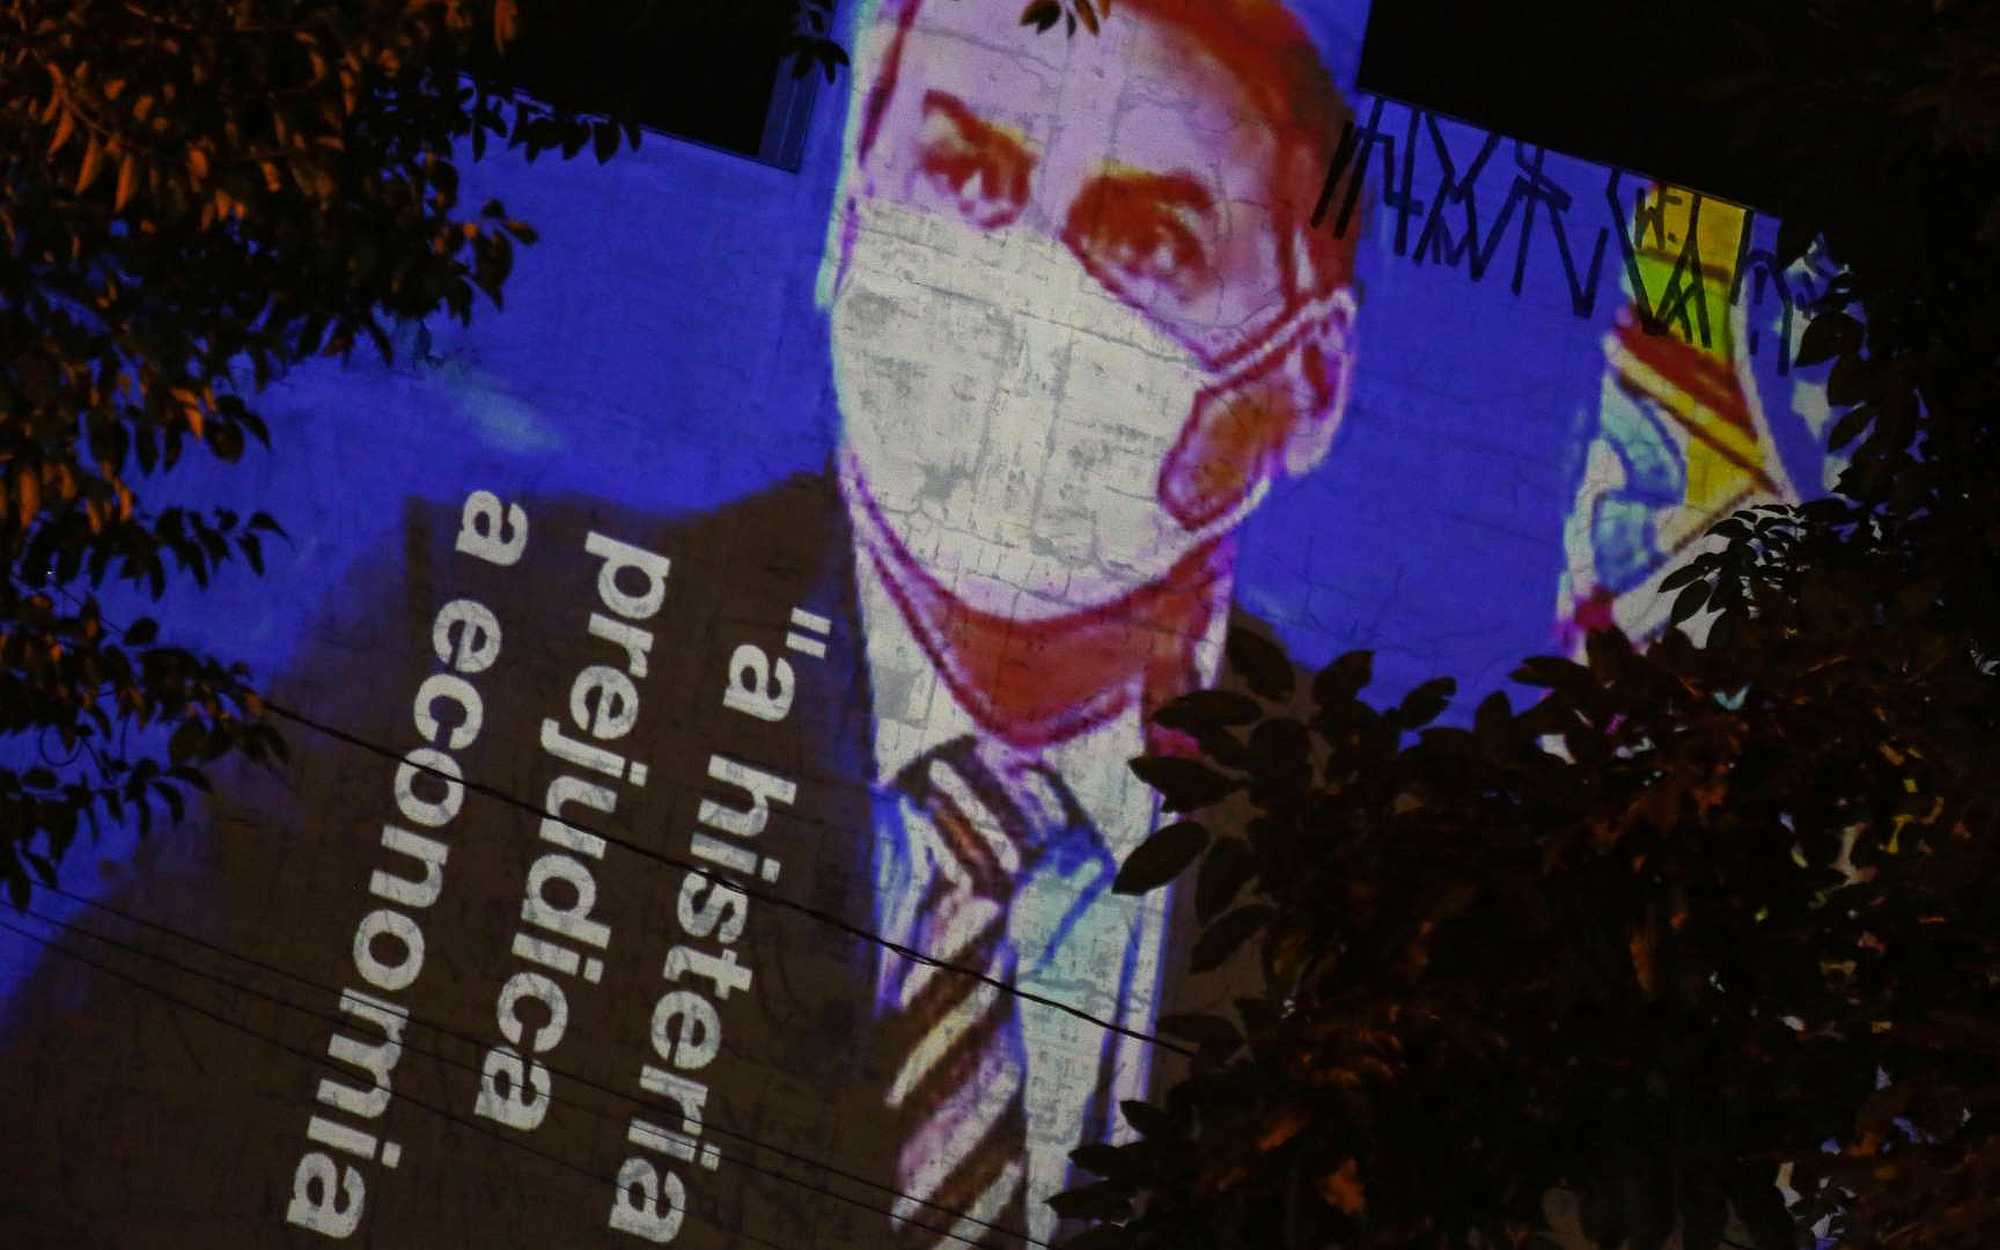 A signboard with the figure of Jair Bolsonaro and the inscription "Hysteria hurts economy" over him.